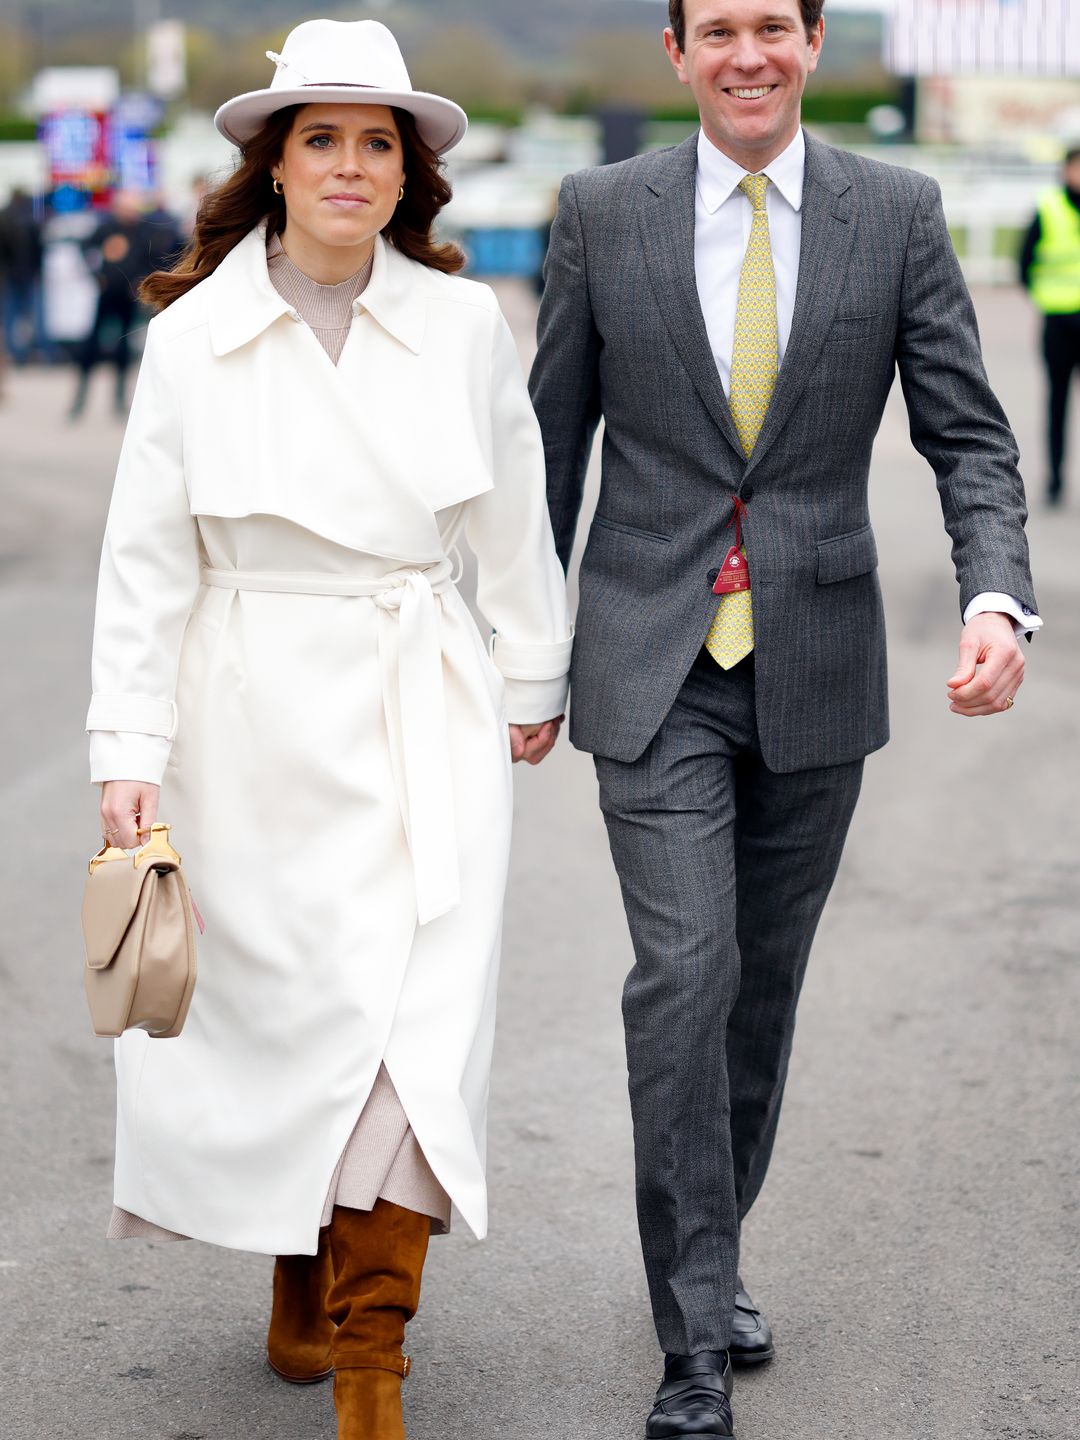 Princess Eugenie wears a white coat and hat to Cheltenham Festival 